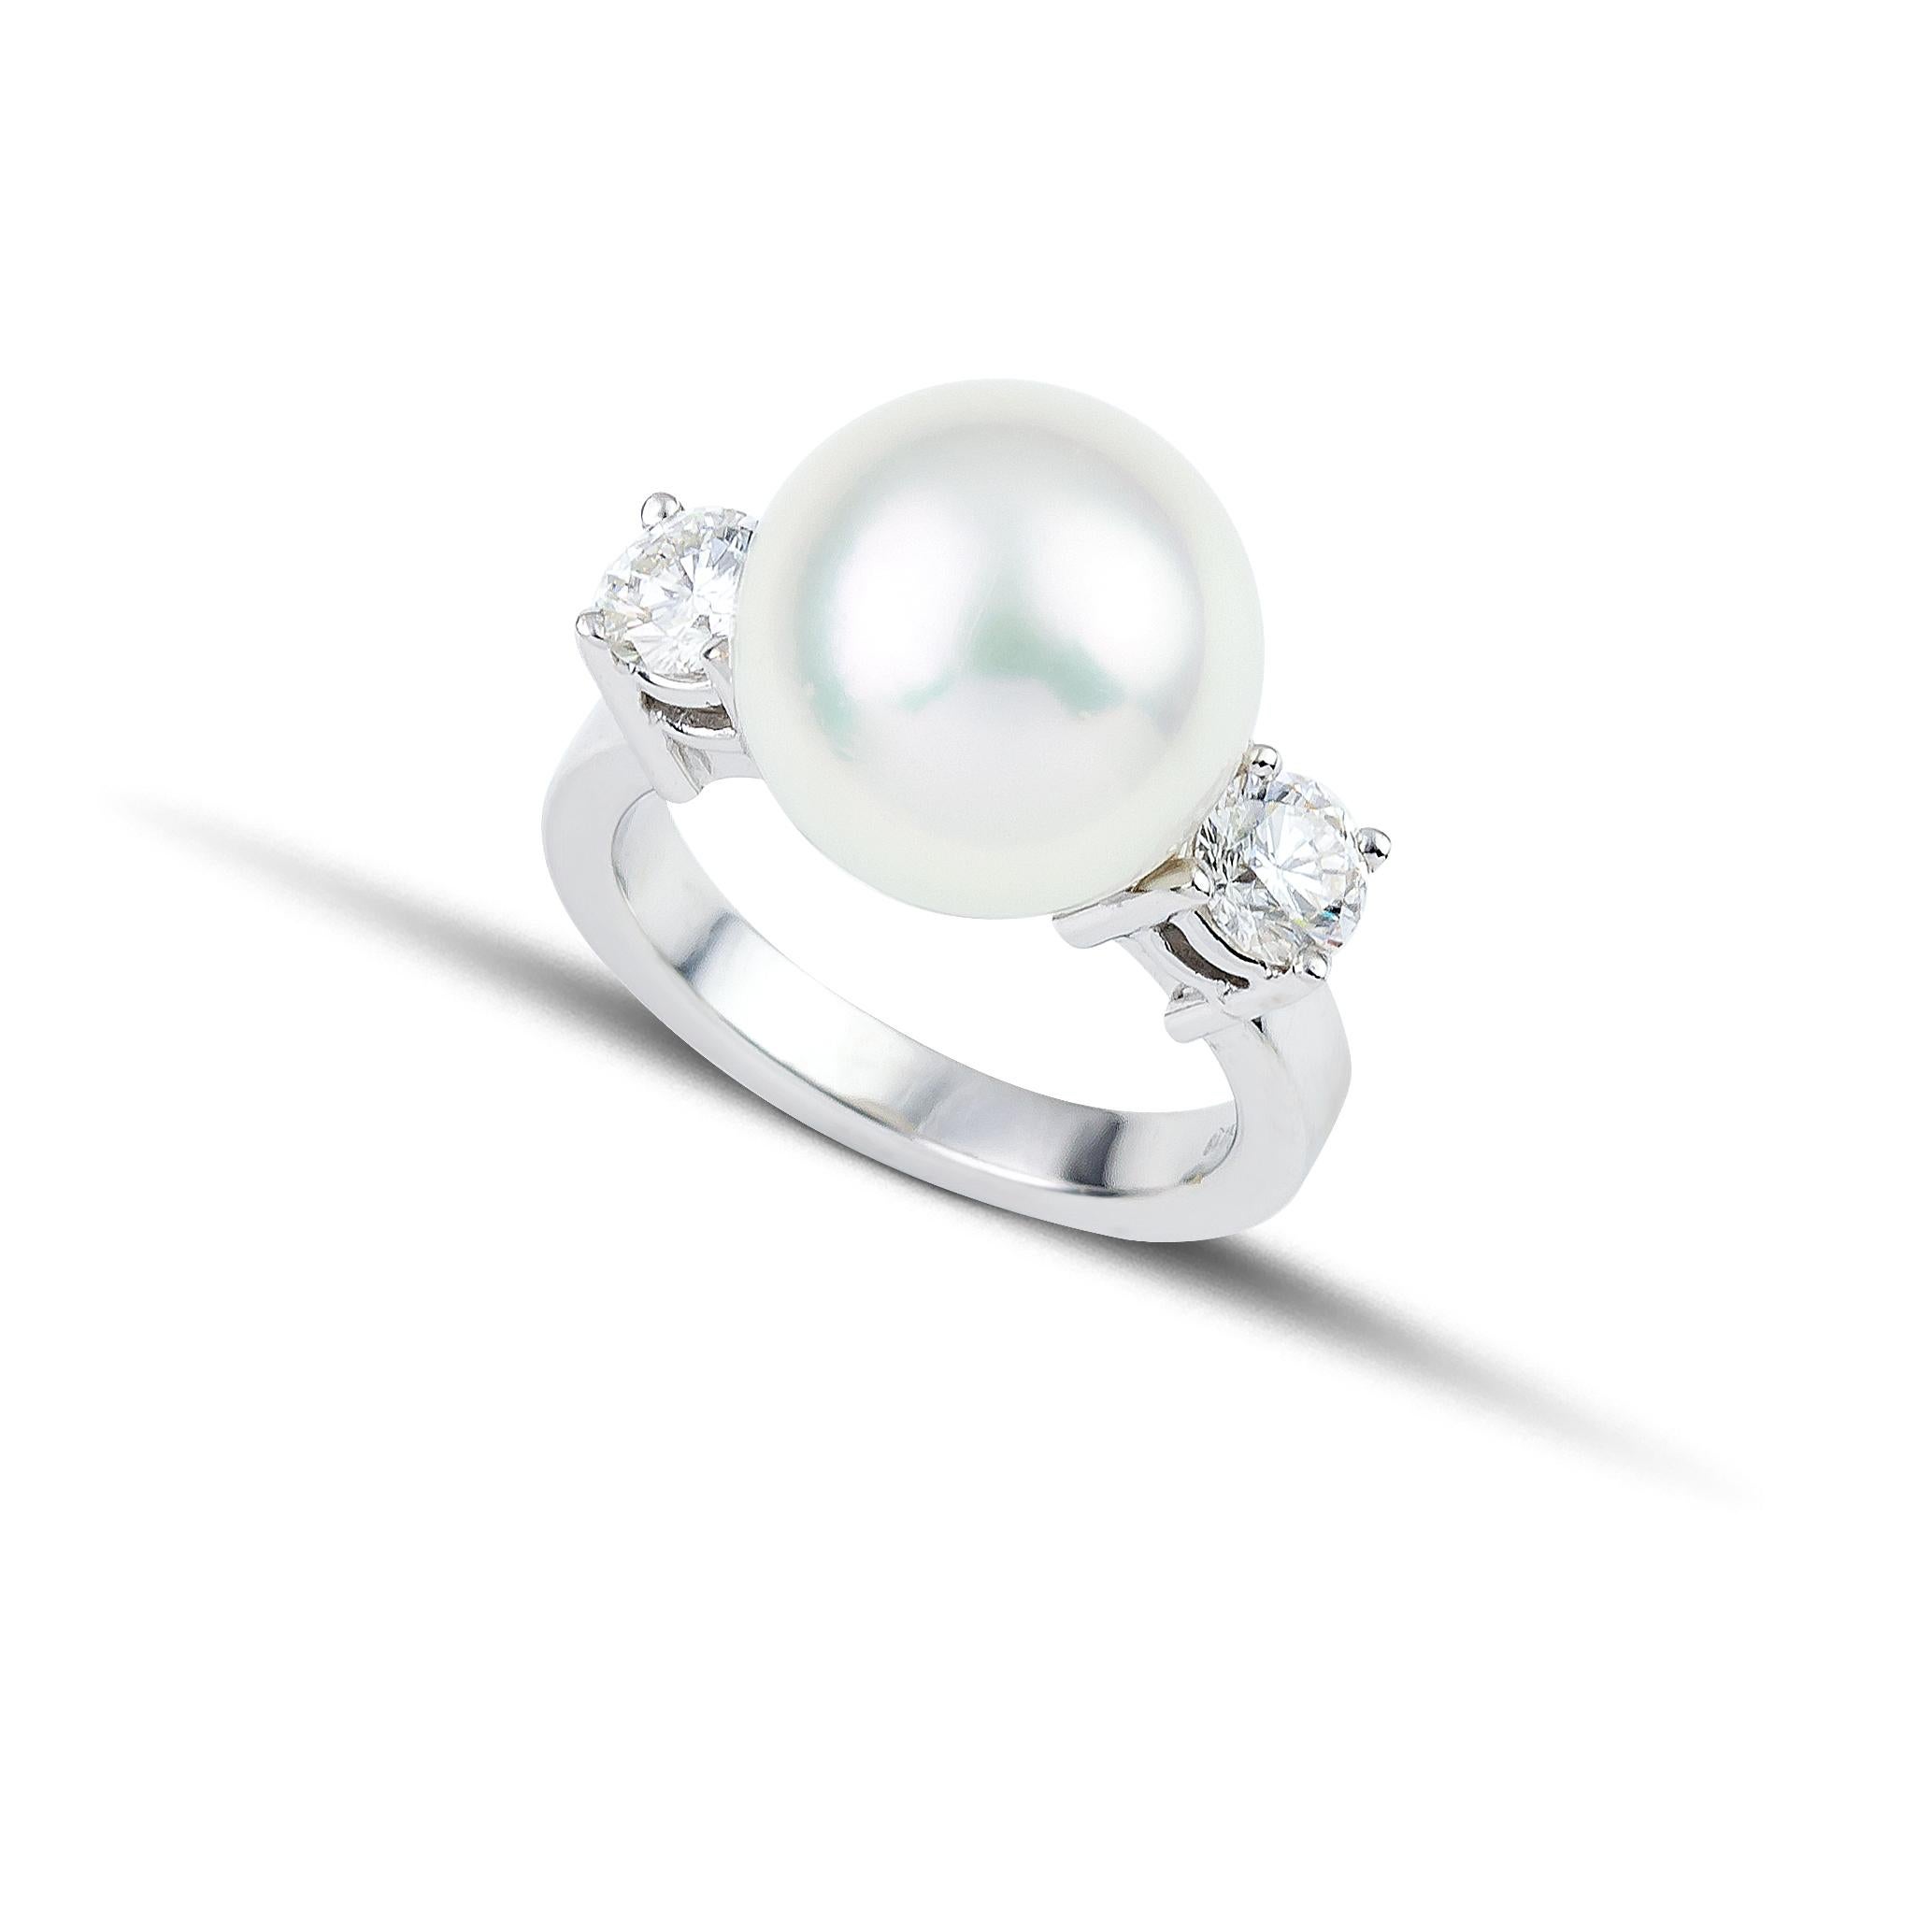 South sea 13mm white pearl ring between two brilliant cut diamonds, handcrafted in 18Kt white gold. The diamonds that are set carefully among four prongs reflect the light and illuminate this elegant South Sea Pearl. This delicate jewelry piece